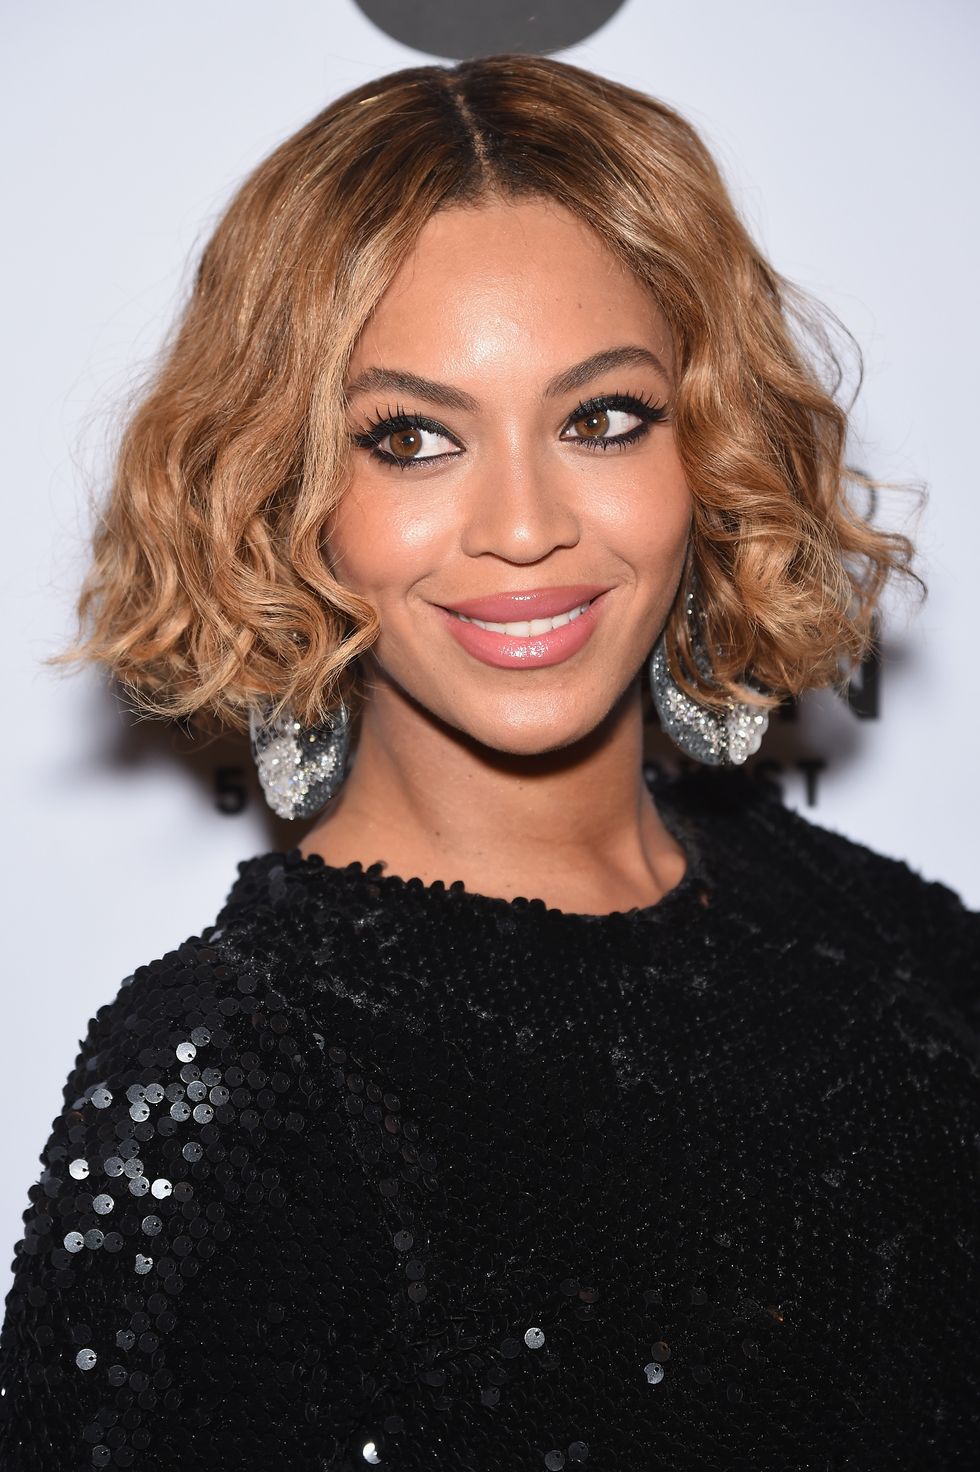 Beyonce looks smokin' in a black sequin LBD - and it's £68 from Topshop